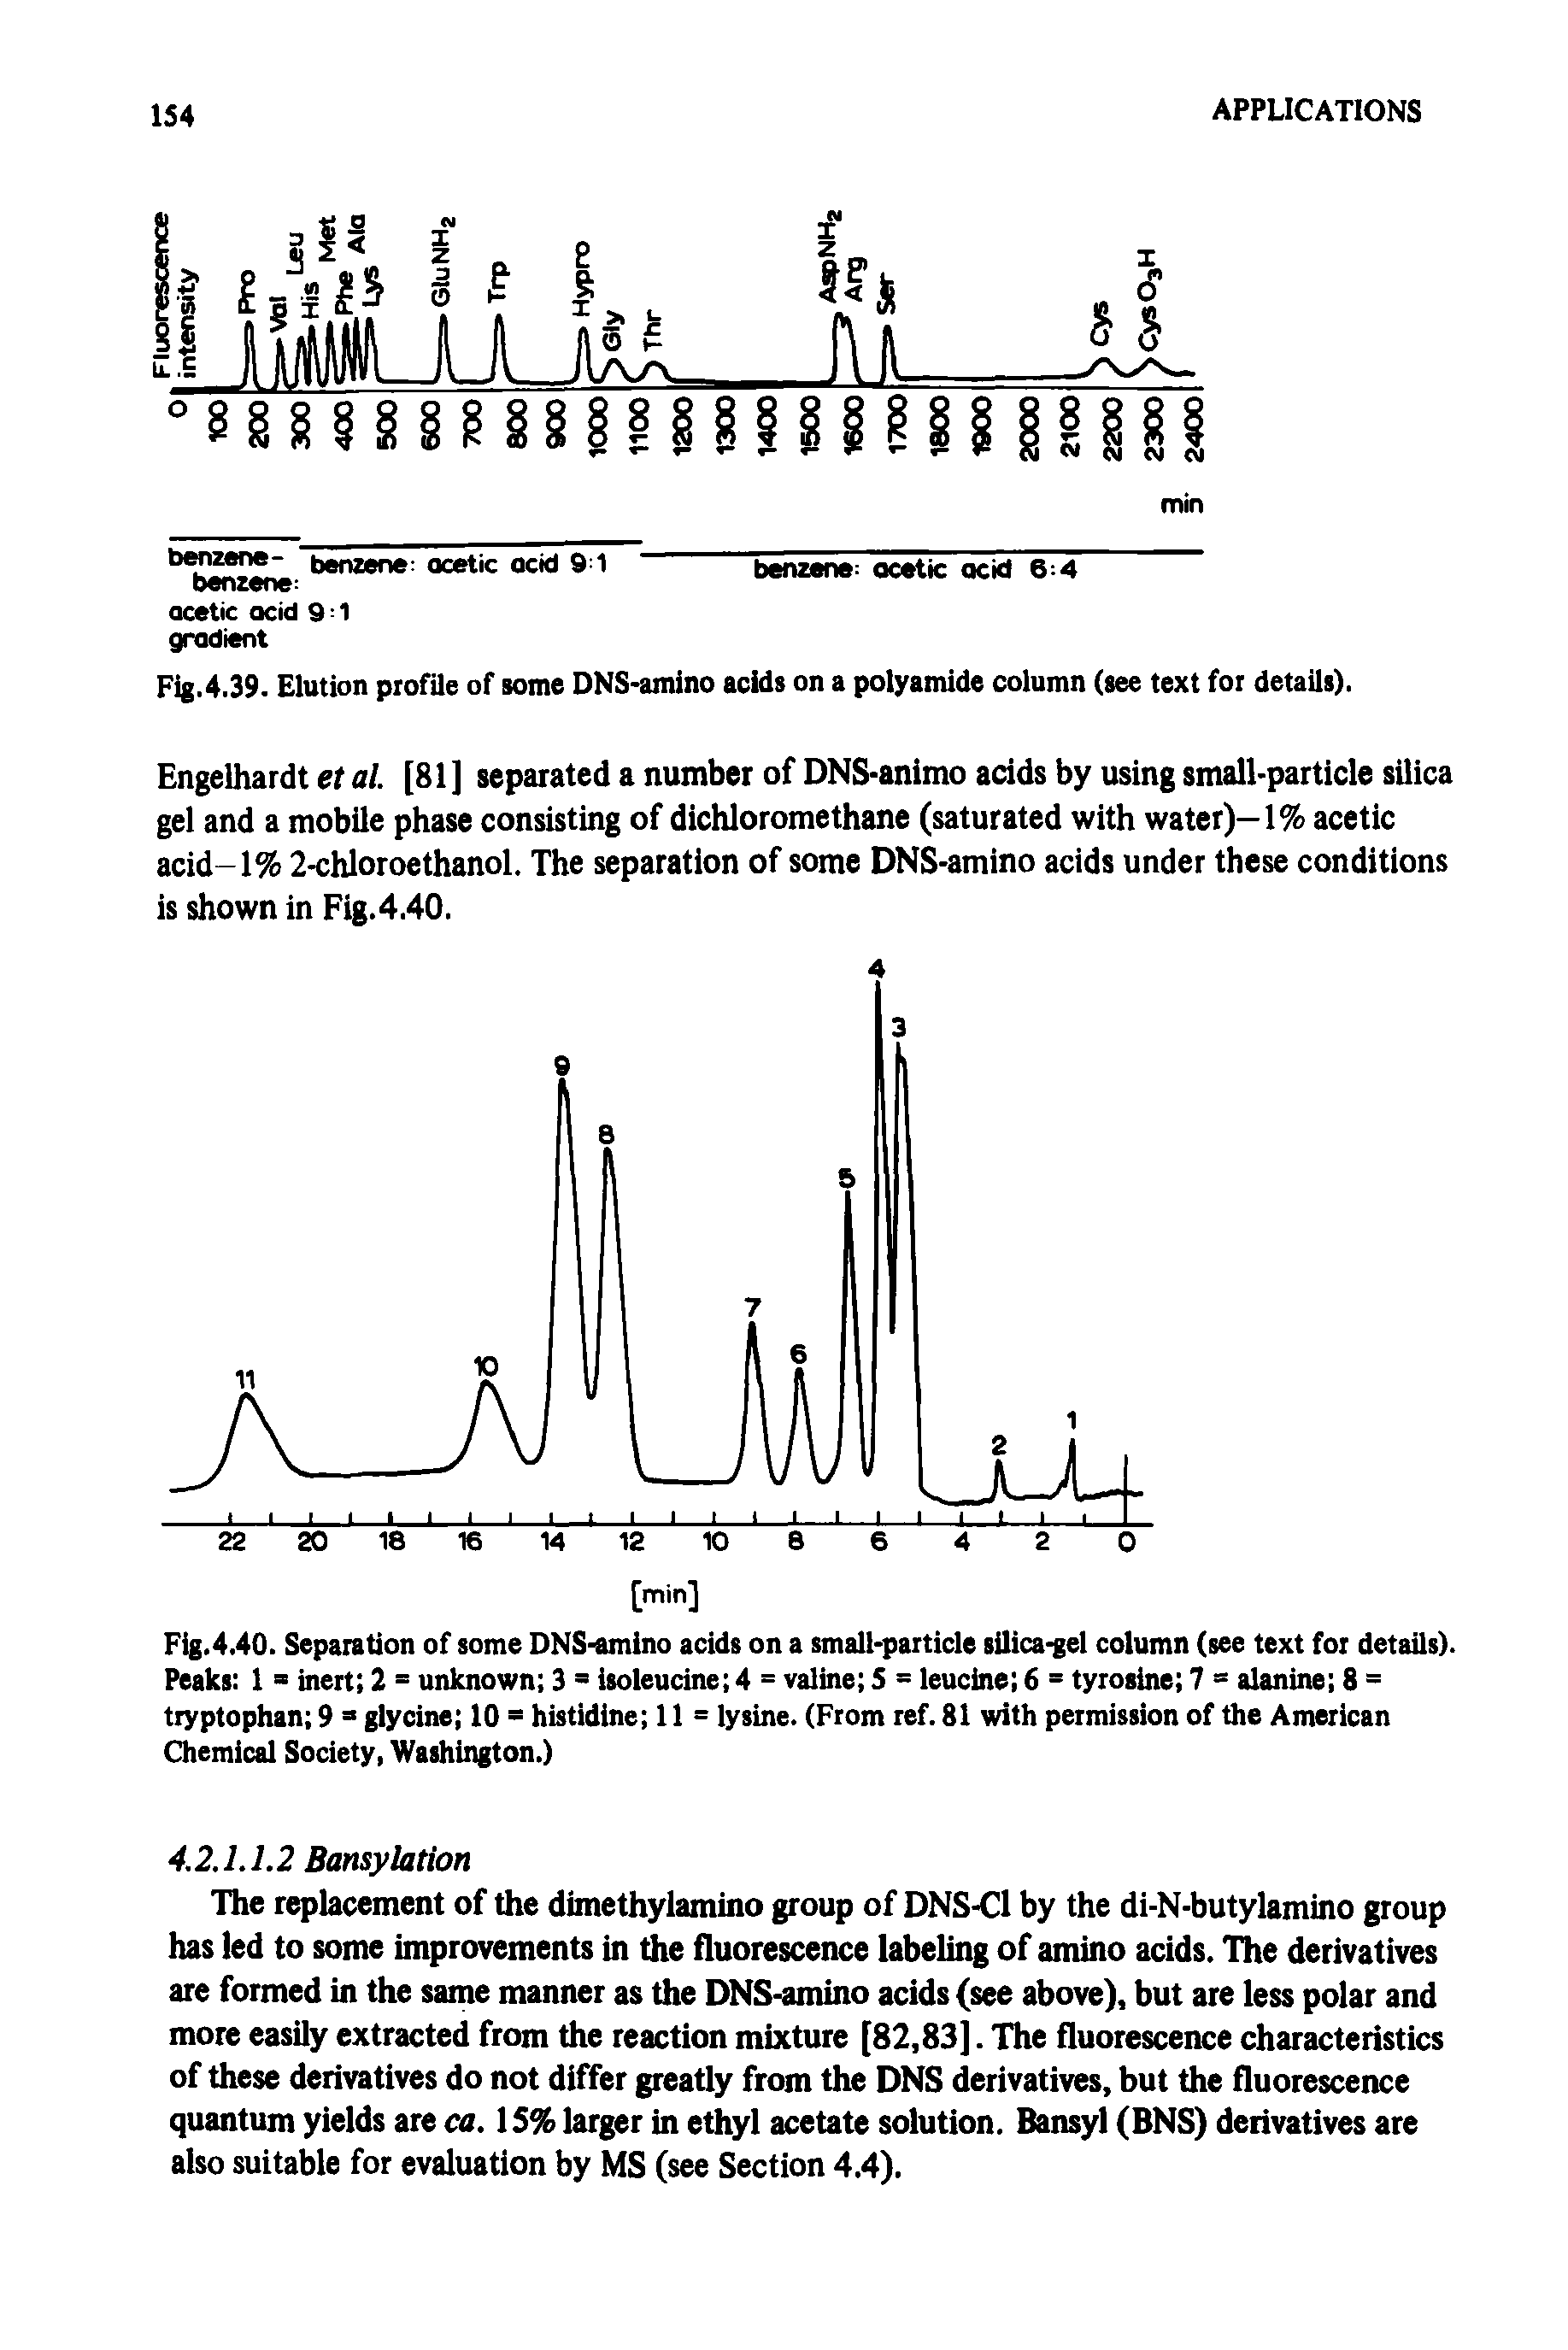 Fig.4.40. Separation of some DNS-amino acids on a small-particle silica-gel column (see text for details). Peaks 1 = inert 2 = unknown 3 isoleucine 4 = valine 5 = leucine 6 = tyrosine 7 = alanine 8 = tryptophan 9 = glycine 10 = histidine 11= lysine. (From ref. 81 with permission of the American Chemical Society, Washington.)...